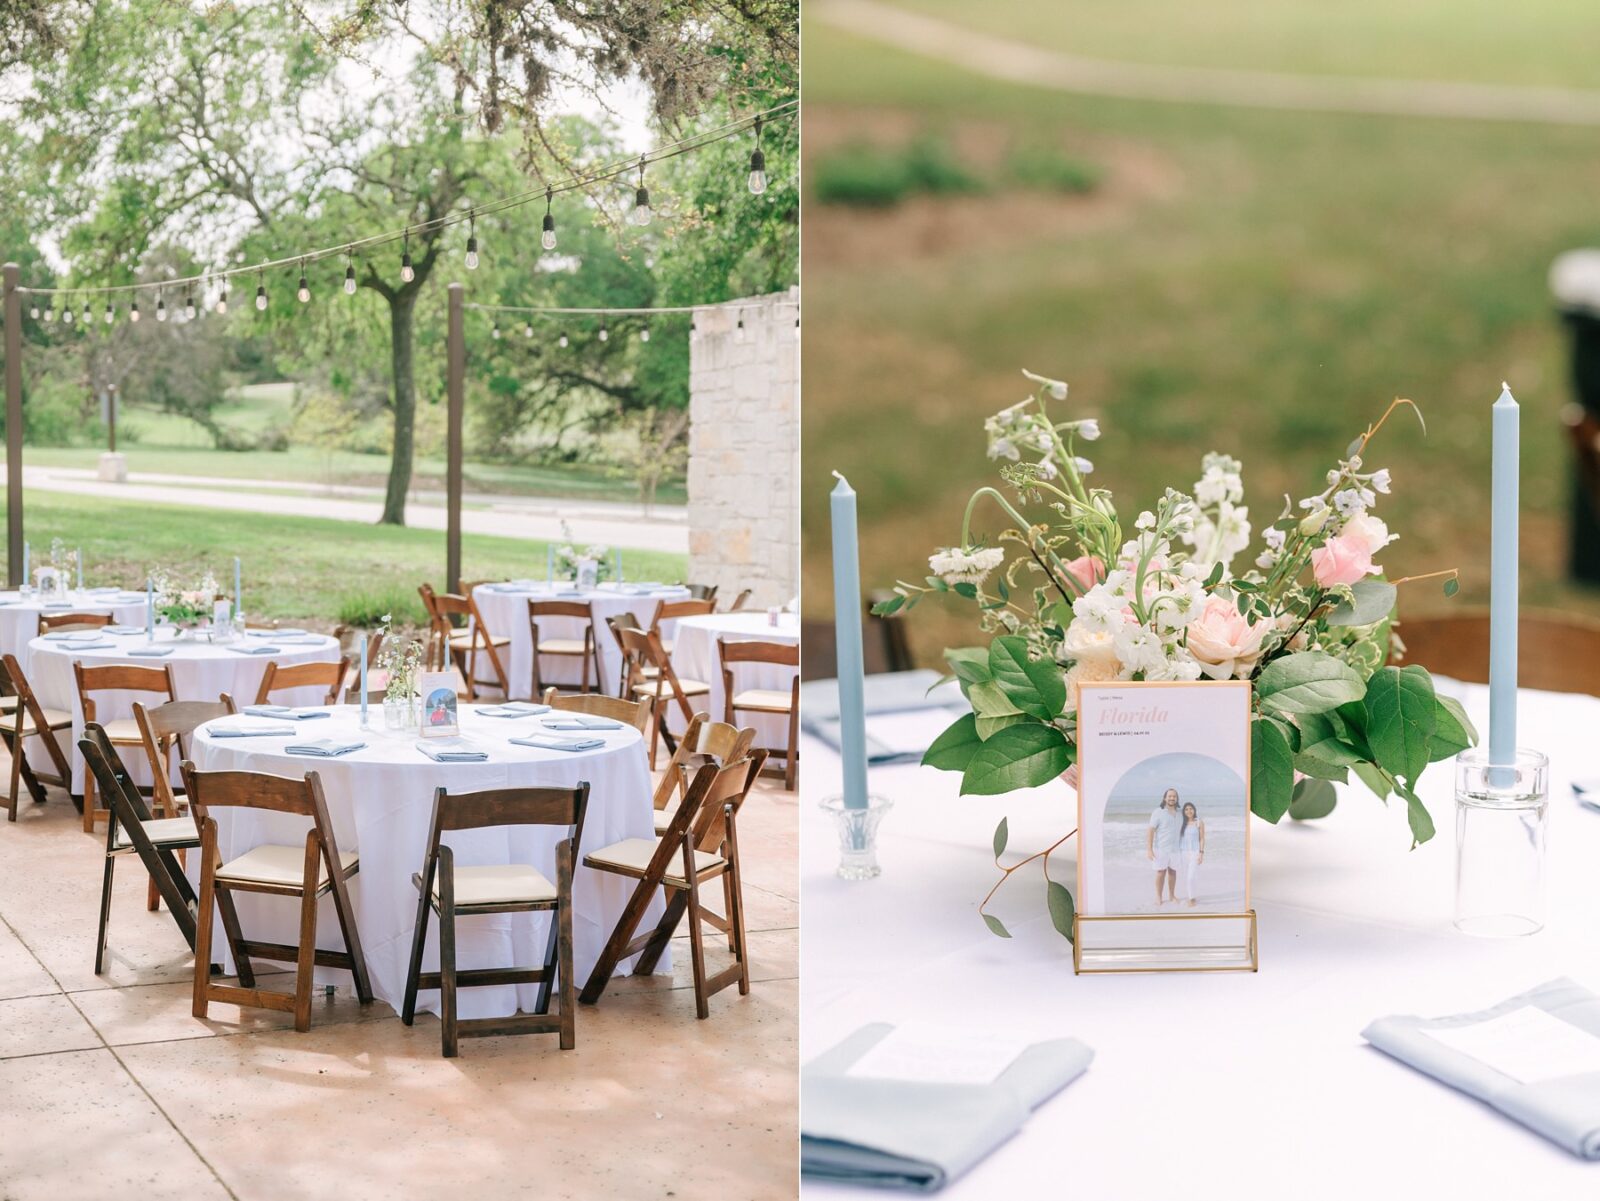 baby blue reception details, garey house reception decorations, cana events, florals by cana events, garey house wedding, reception at garey house, catholic wedding photography tips, photos by Tara Lyons Photography, Austin texas wedding photographer, garey house wedding